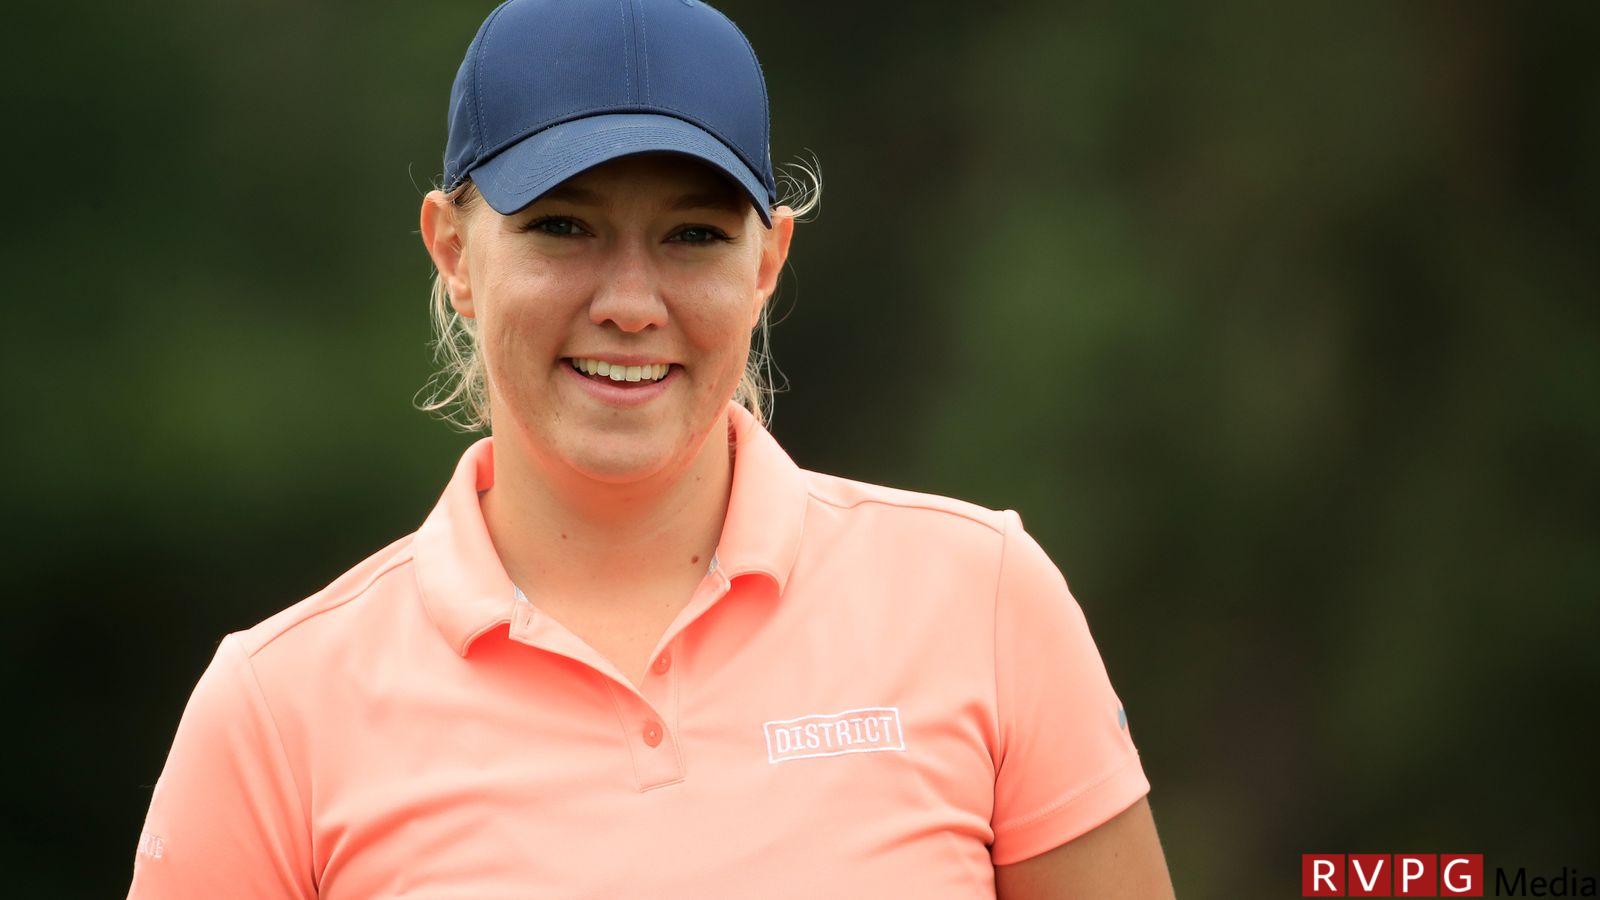 South African Women's Open: Rosie Davies takes an early lead at six under par in the opening round